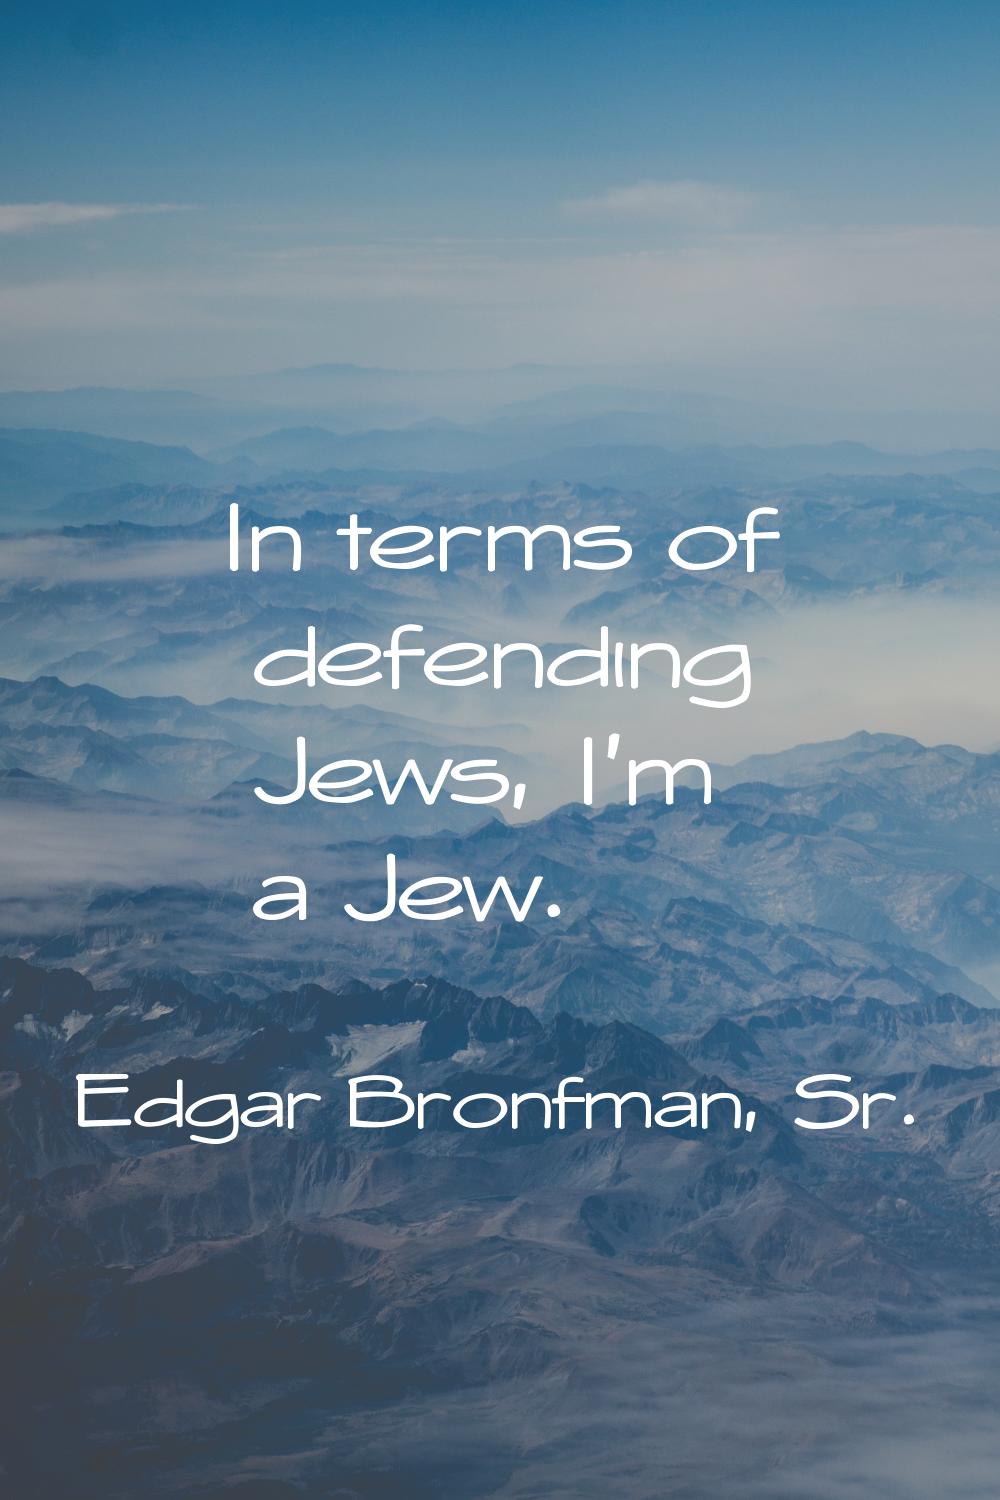 In terms of defending Jews, I'm a Jew.